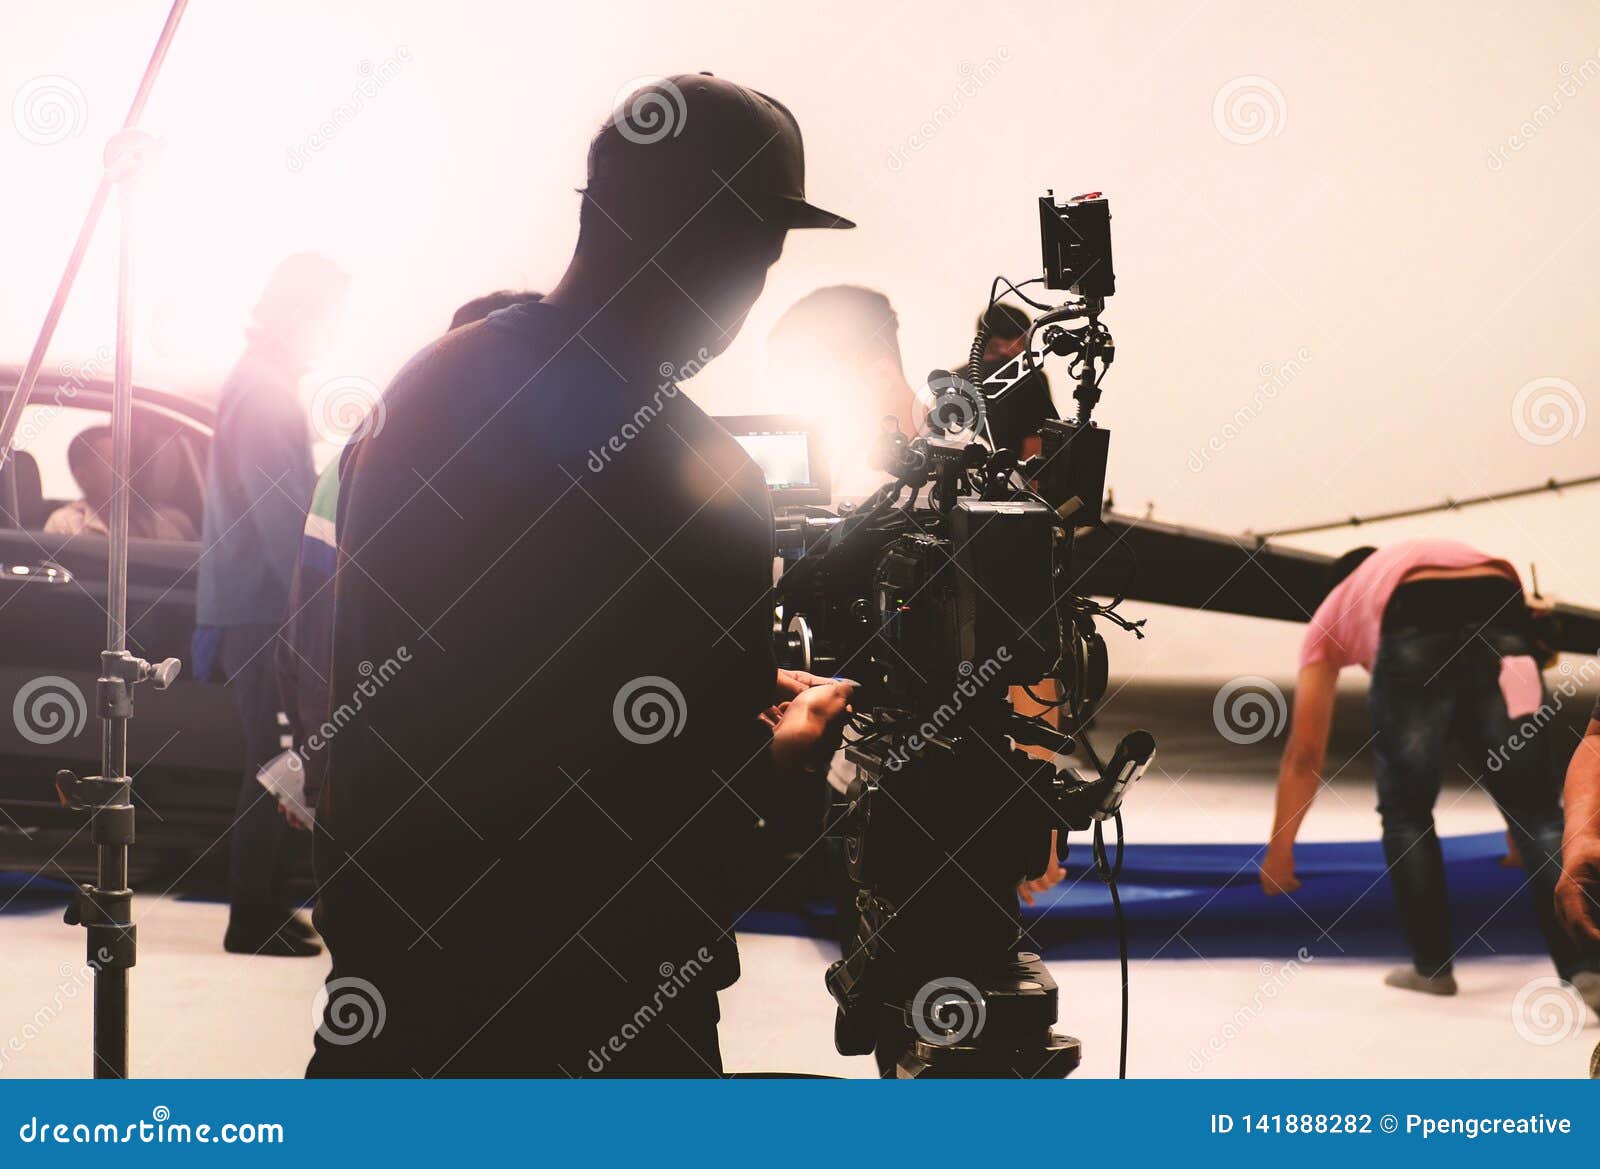 Video Camera in Film or Movie Production on Tripod Stock Photo